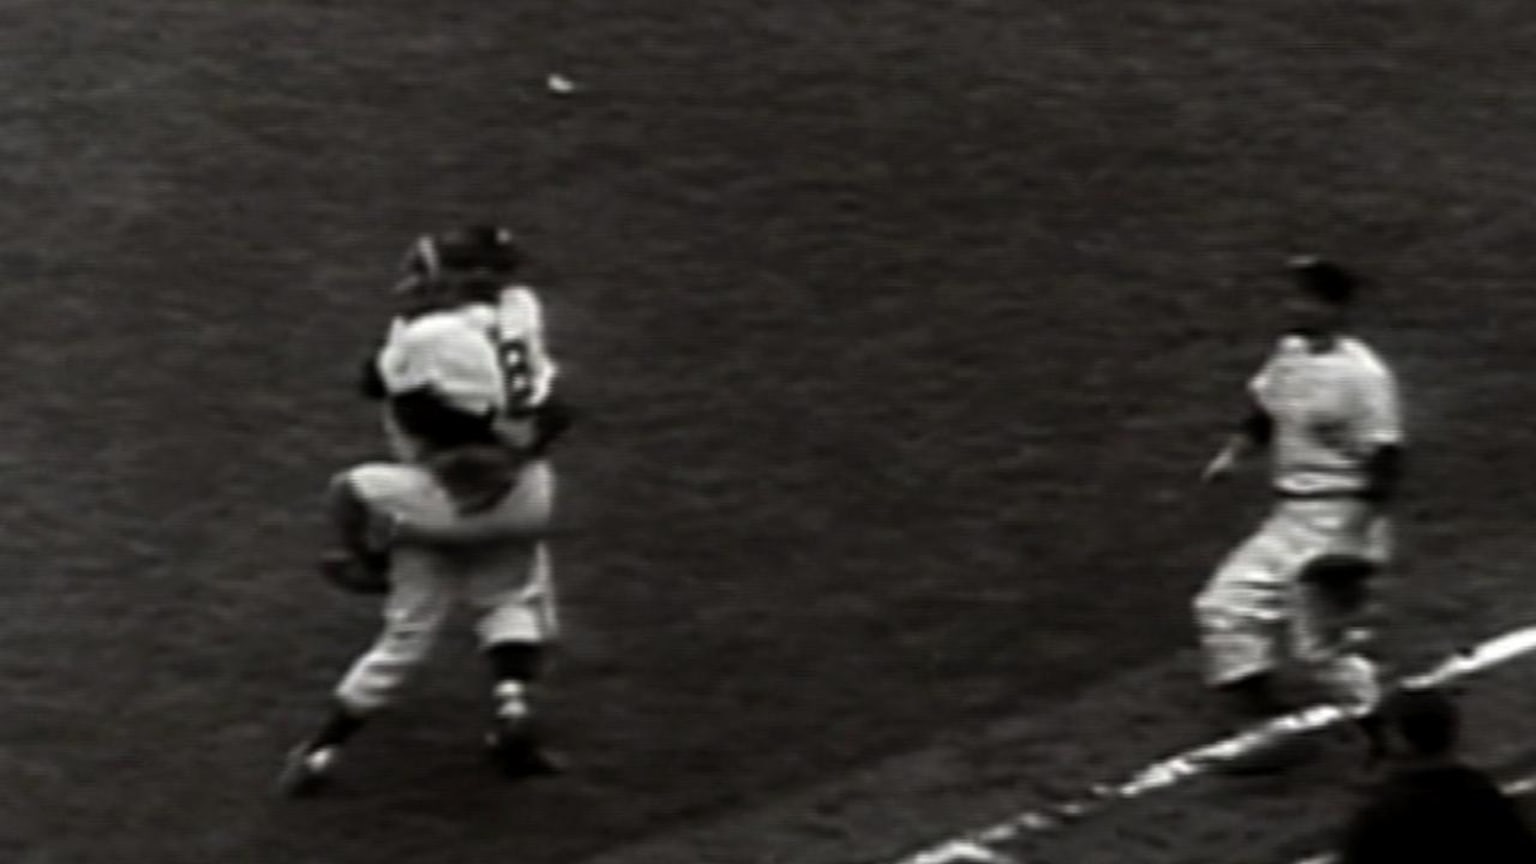 Don Larsen pitches perfect game in 1956 World Series - Sports